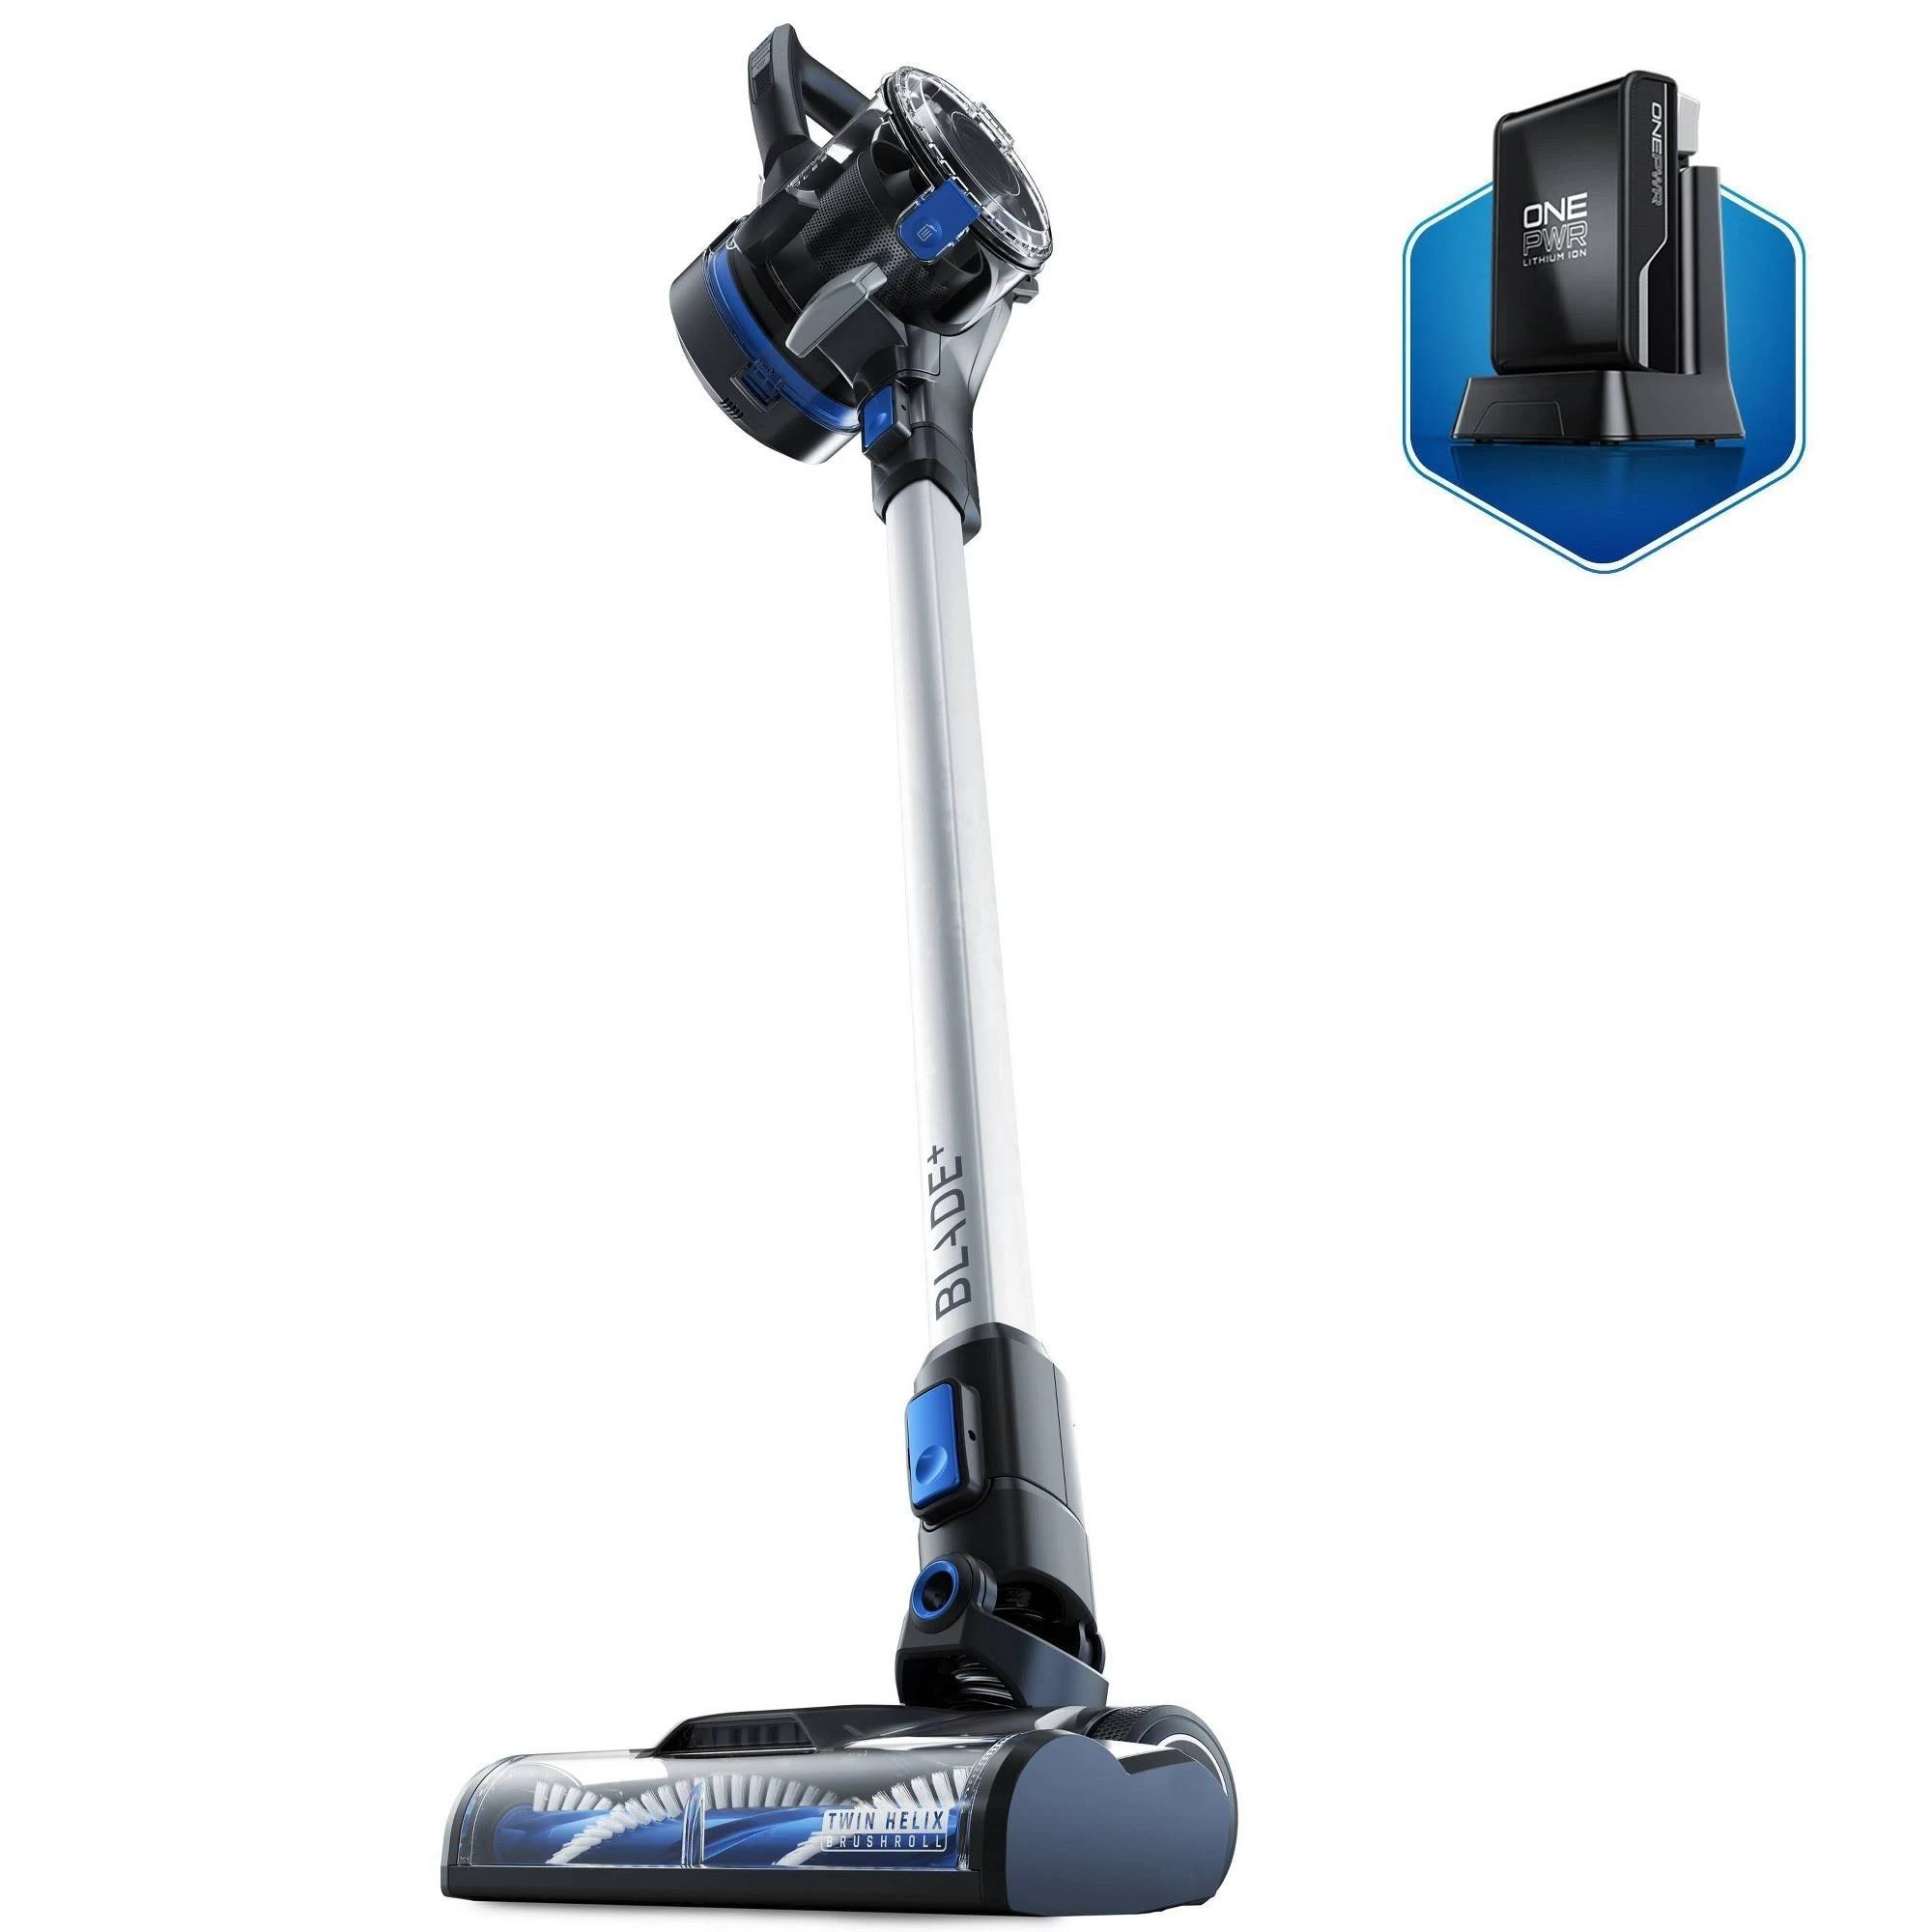 Hoover ONEPWR Cordless Stick Vacuum